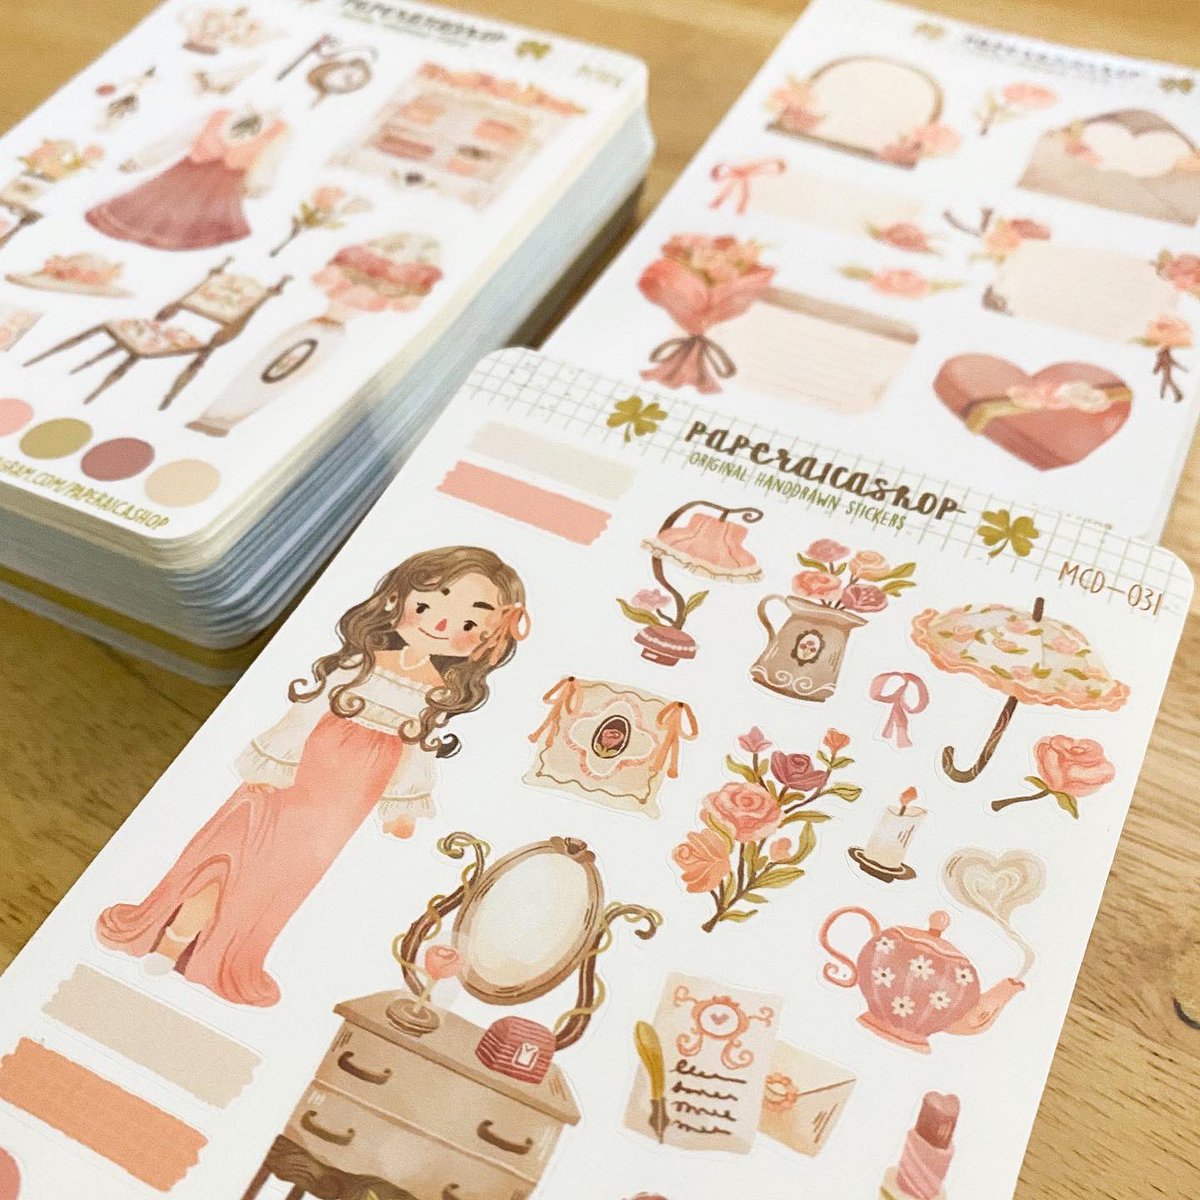 Dainty rosy goodies releasing tomorrow on Etsy & Shopee 🌷✨🤍 9AM EST, 9PM PHT (🇵🇭)

🌎 paperaicashop.etsy.com
🇵🇭 shopee.ph/paperaicashopph

#plannerstickers #stickershop #journalstickers